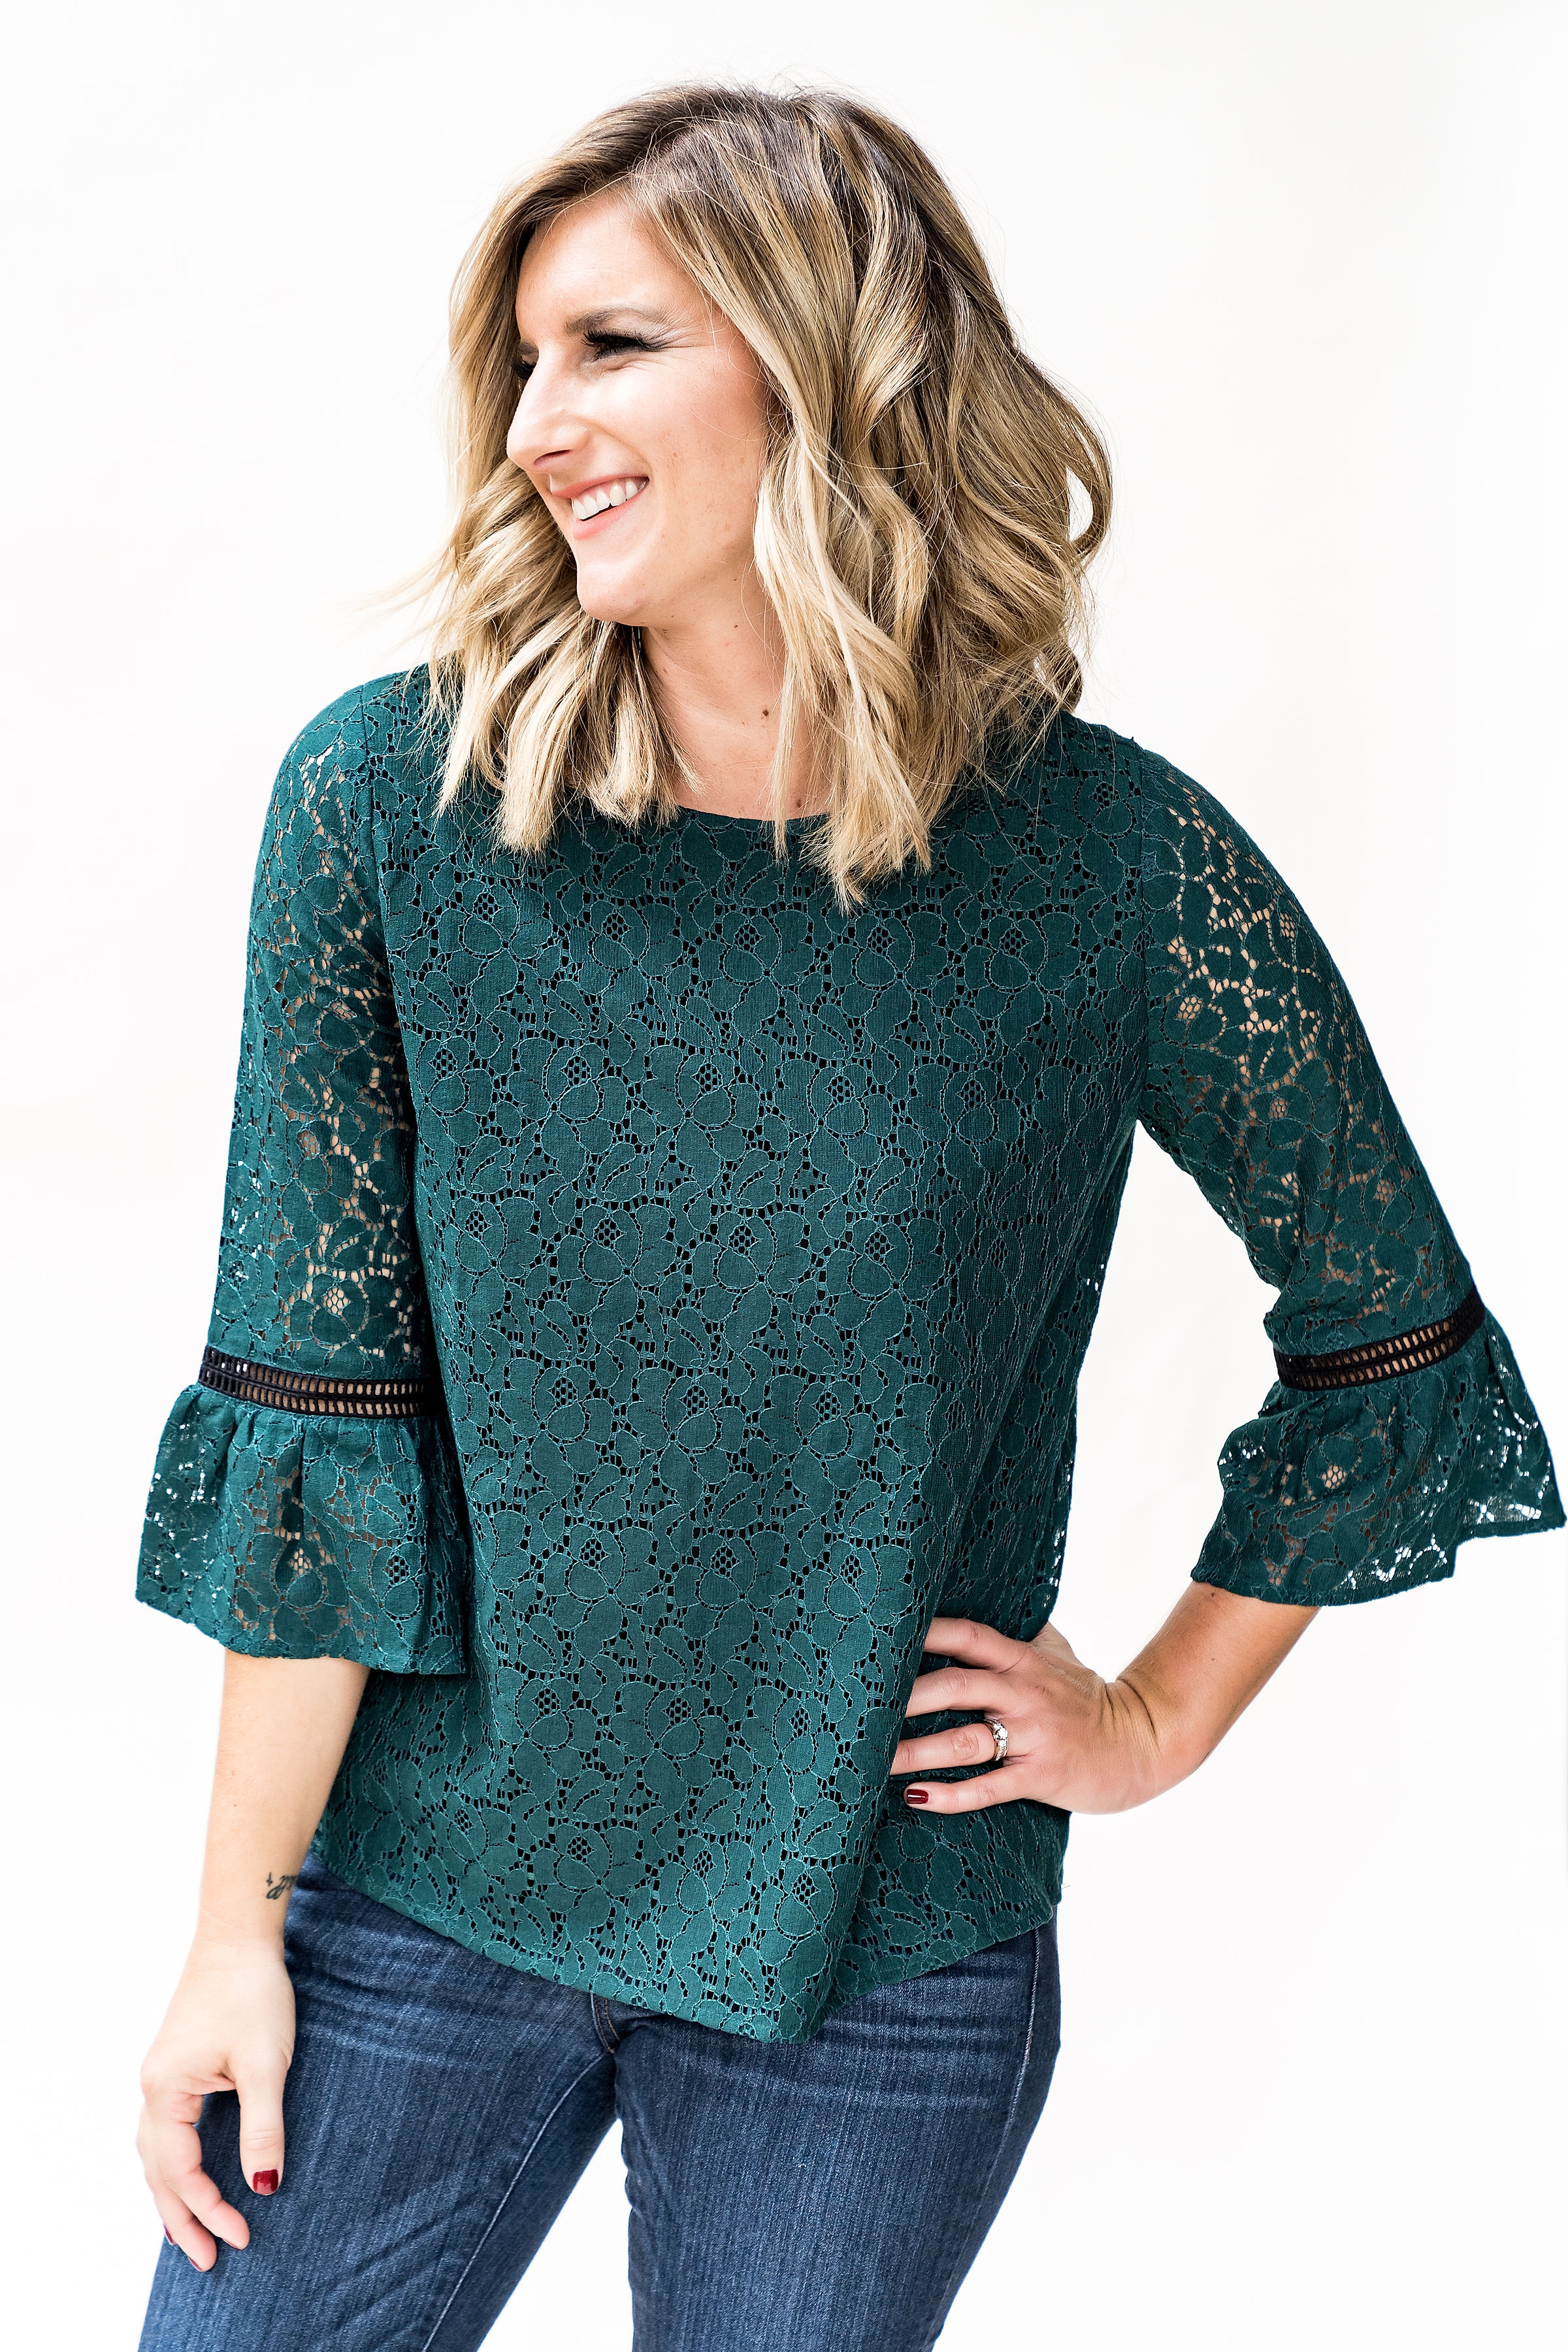 holiday outfit ideas from the gibson glam collection - the erin lace bell sleeve top in green